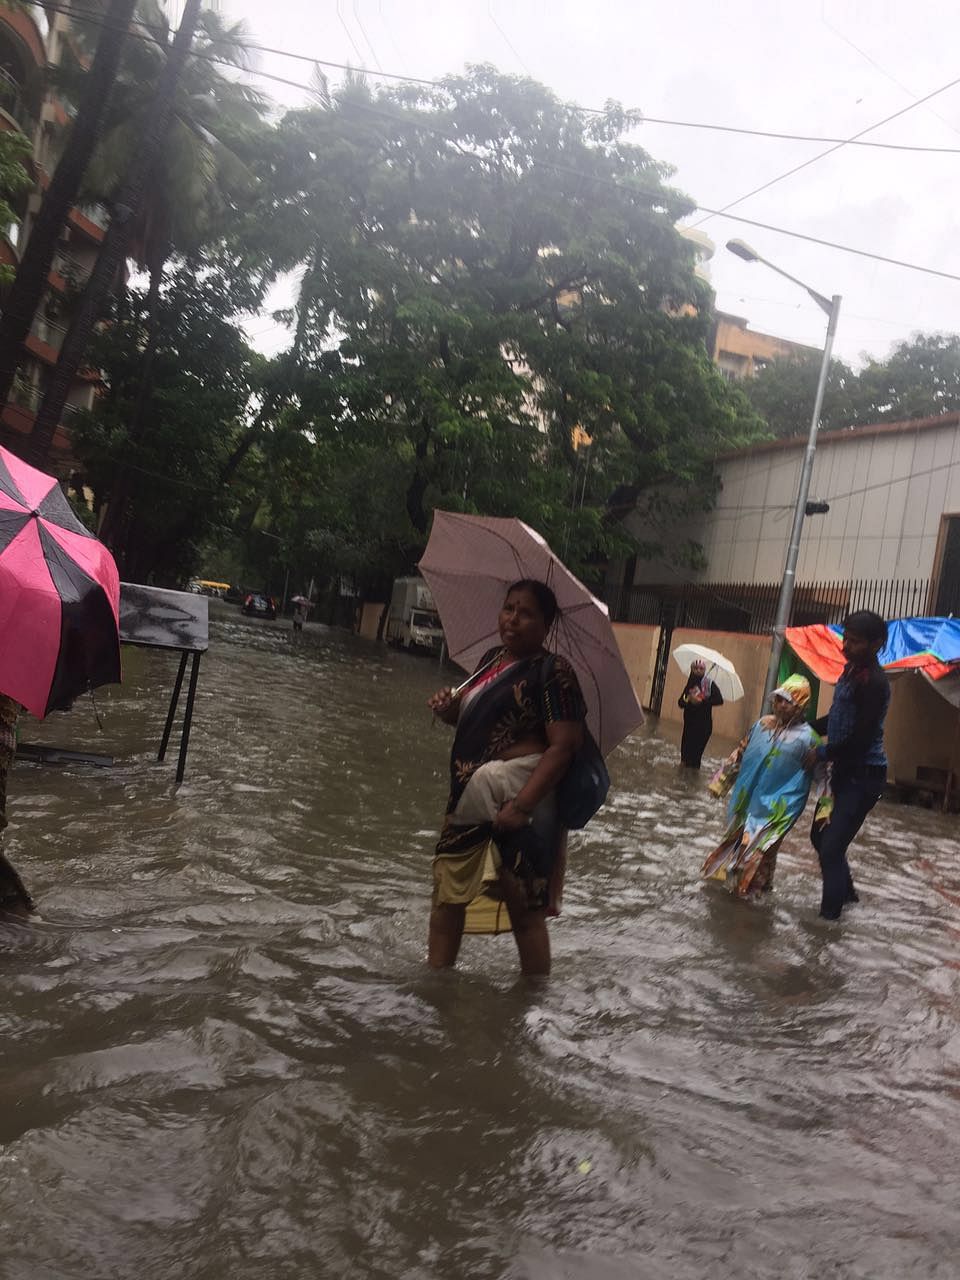 The rains led to water-logging in parts of south and central Mumbai, leading to major traffic snarls.